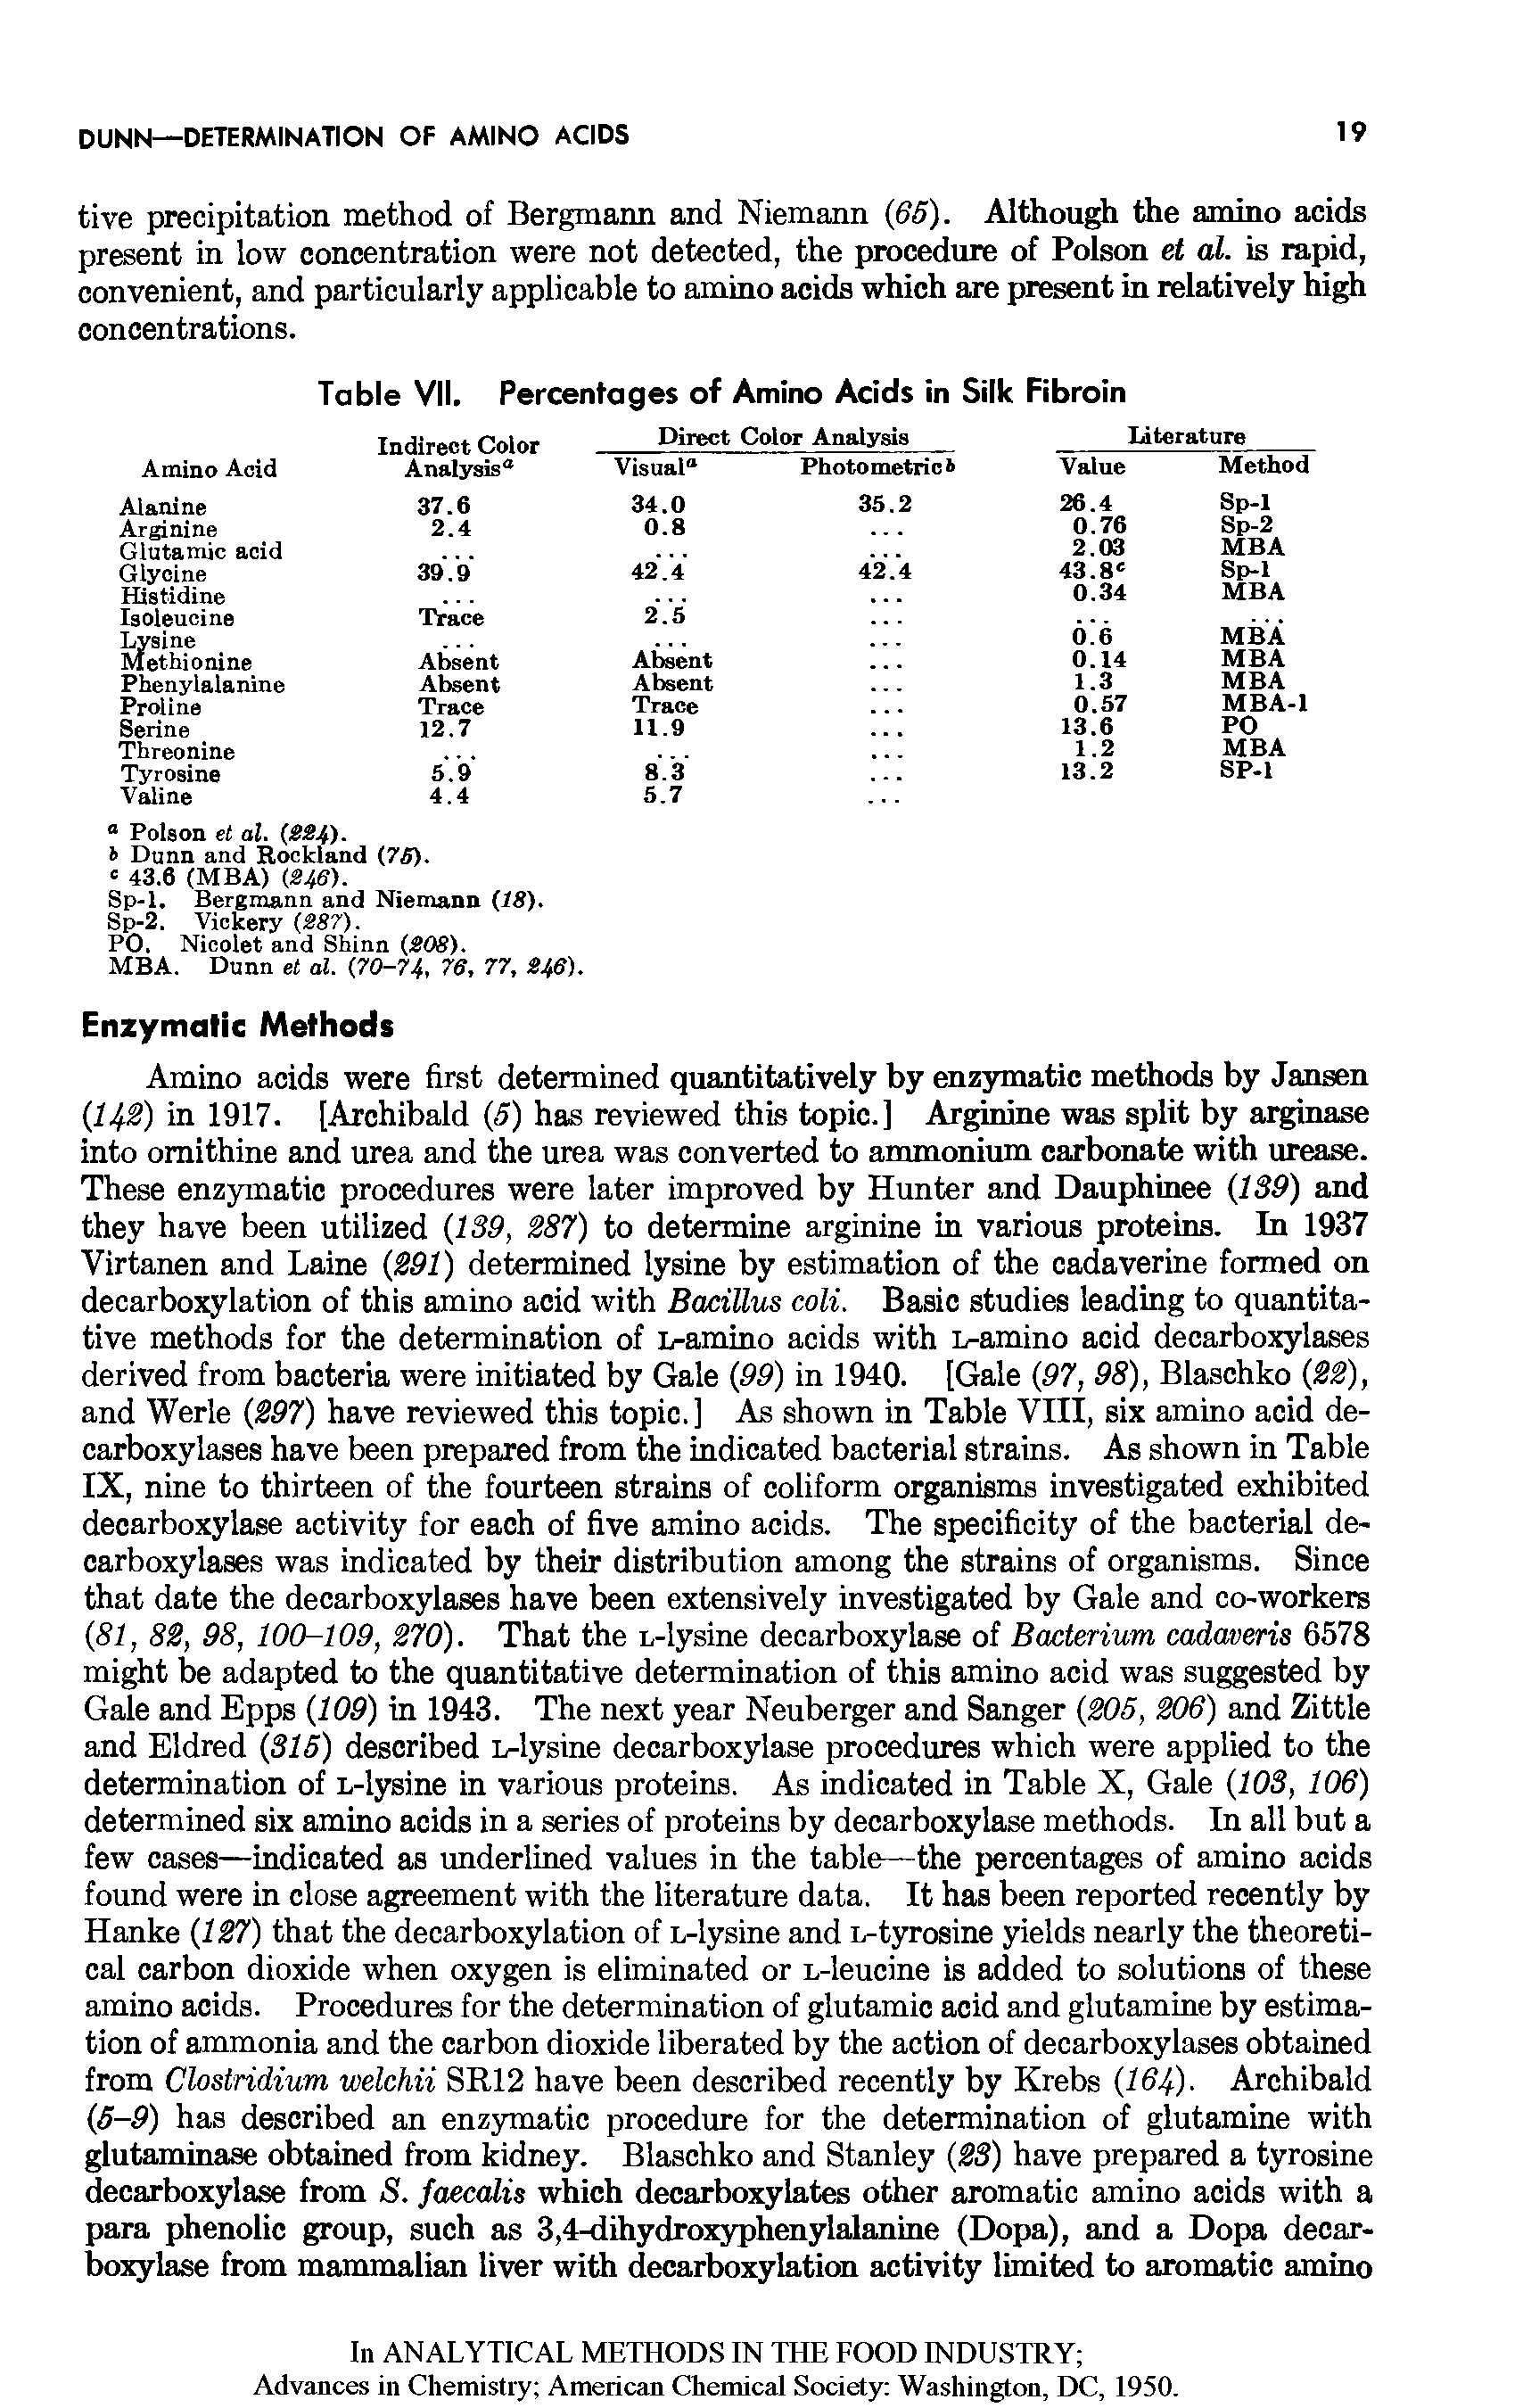 Table VII. Percentages of Amino Acids in TnSIrMtRnlnr Direct Color Analysis Silk Fibroin literature ...